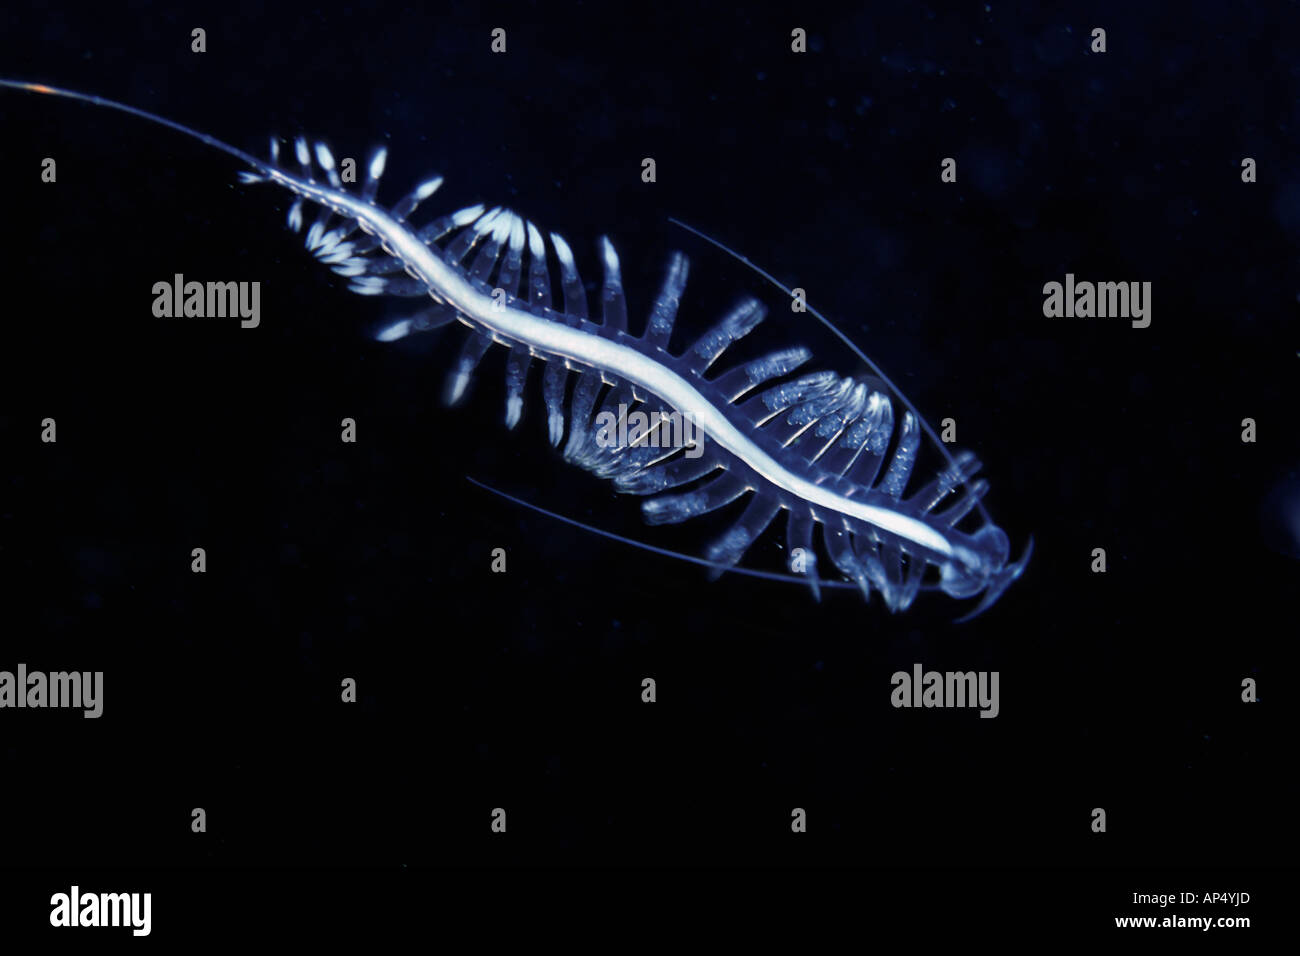 Tailed Pacific Transparent worm, Tomopteris pacifica, British Columbia, Canada. Stock Photo